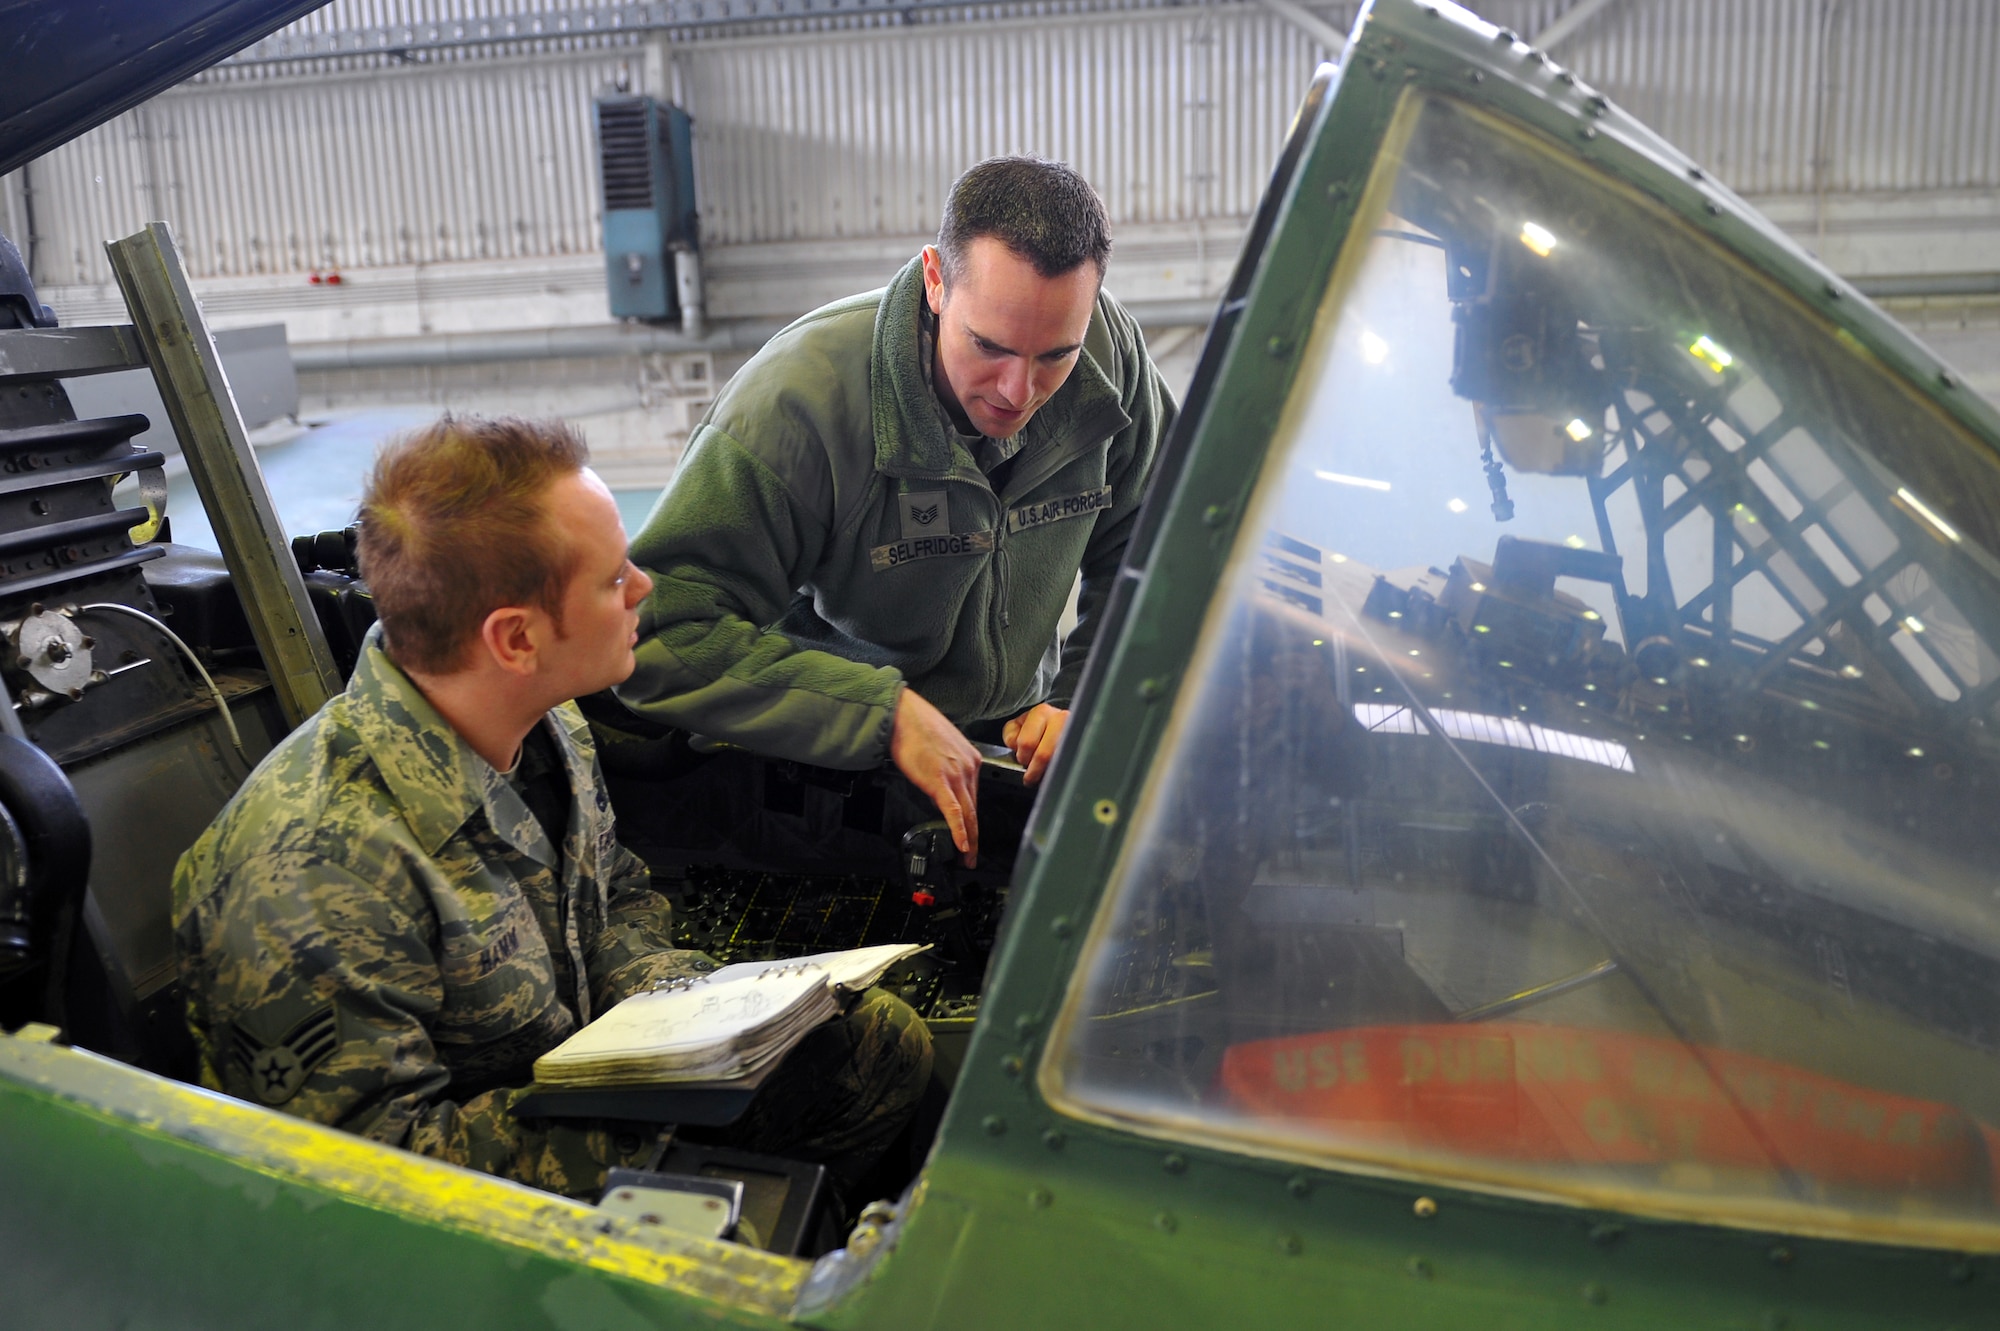 SPANGDAHLEM AIR BASE, Germany – Staff Sgt. Michael Selfridge, right, 52nd Maintenance Operations Squadron aircraft maintenance inspector, inspects Senior Airman Troy Hamm’s, 81st Fighter Squadron maintenance section journeyman, work during throttle maintenance training on an A-10 Thunderbolt II inside Hangar two here March 8. The AMXS quality assurance section is made up of eight certified maintenance inspectors who inspect 81st and 480th Fighter Squadron aircraft maintenance processes. Quality assurance modernizes the Air Force’s aircraft maintenance and training by tracking maintenance performance against metrics to improve efficiency, production, and reliability.  (U.S. Air Force photo by Airman 1st Class Dillon Davis/Released)